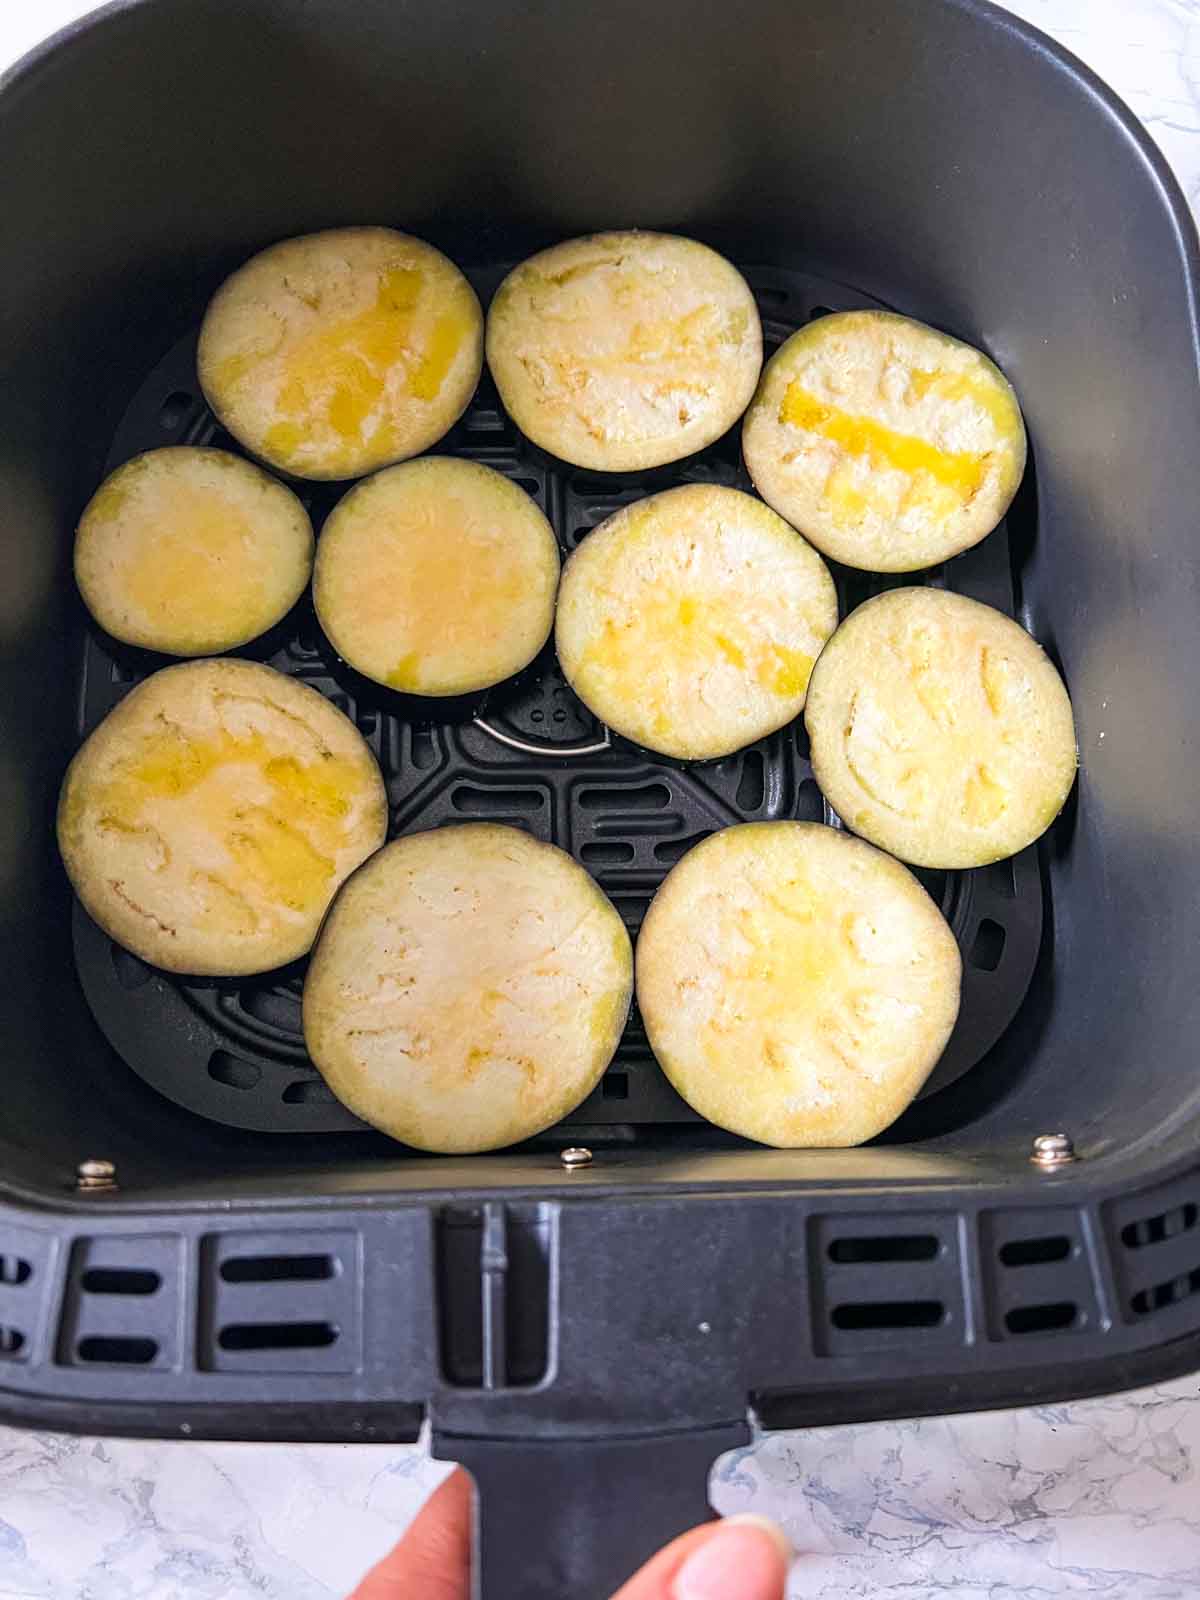 slices of eggplant in an airfryer basket